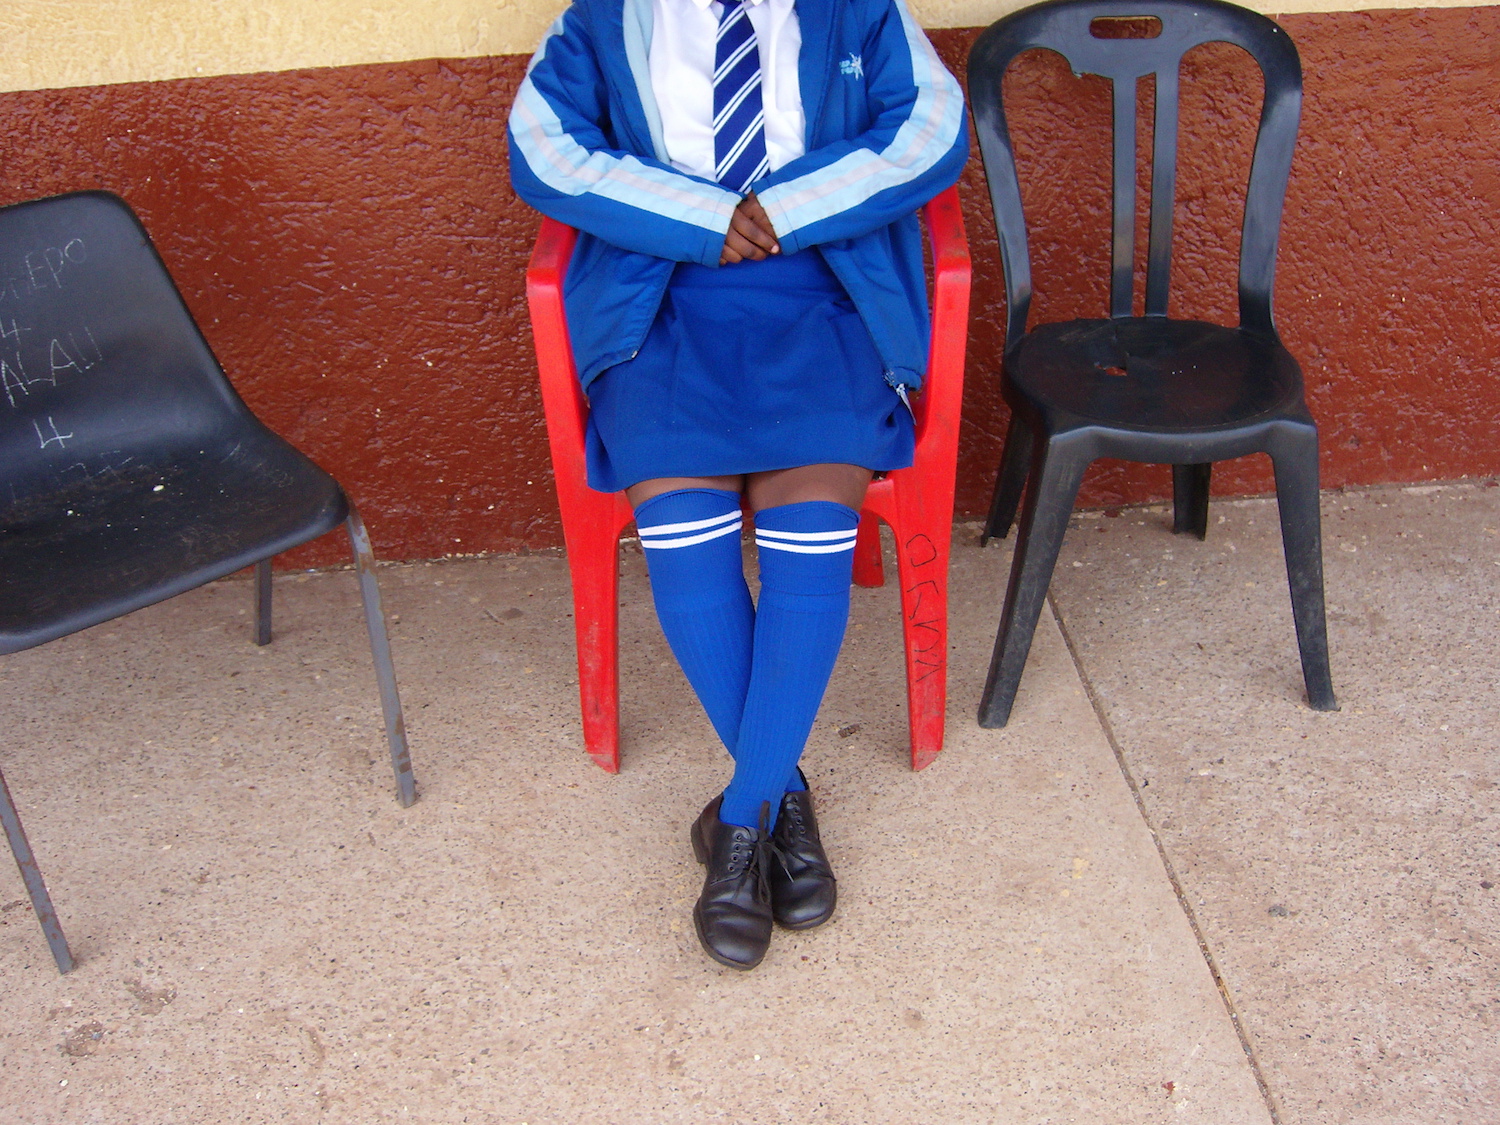  This photo means a lot to me because I'm wearing my uniform. When I was young I didn’t think I would go to secondary school. I'm so happy because my parents have decided to let me be educated. I will be able to support them. My mother believes in me